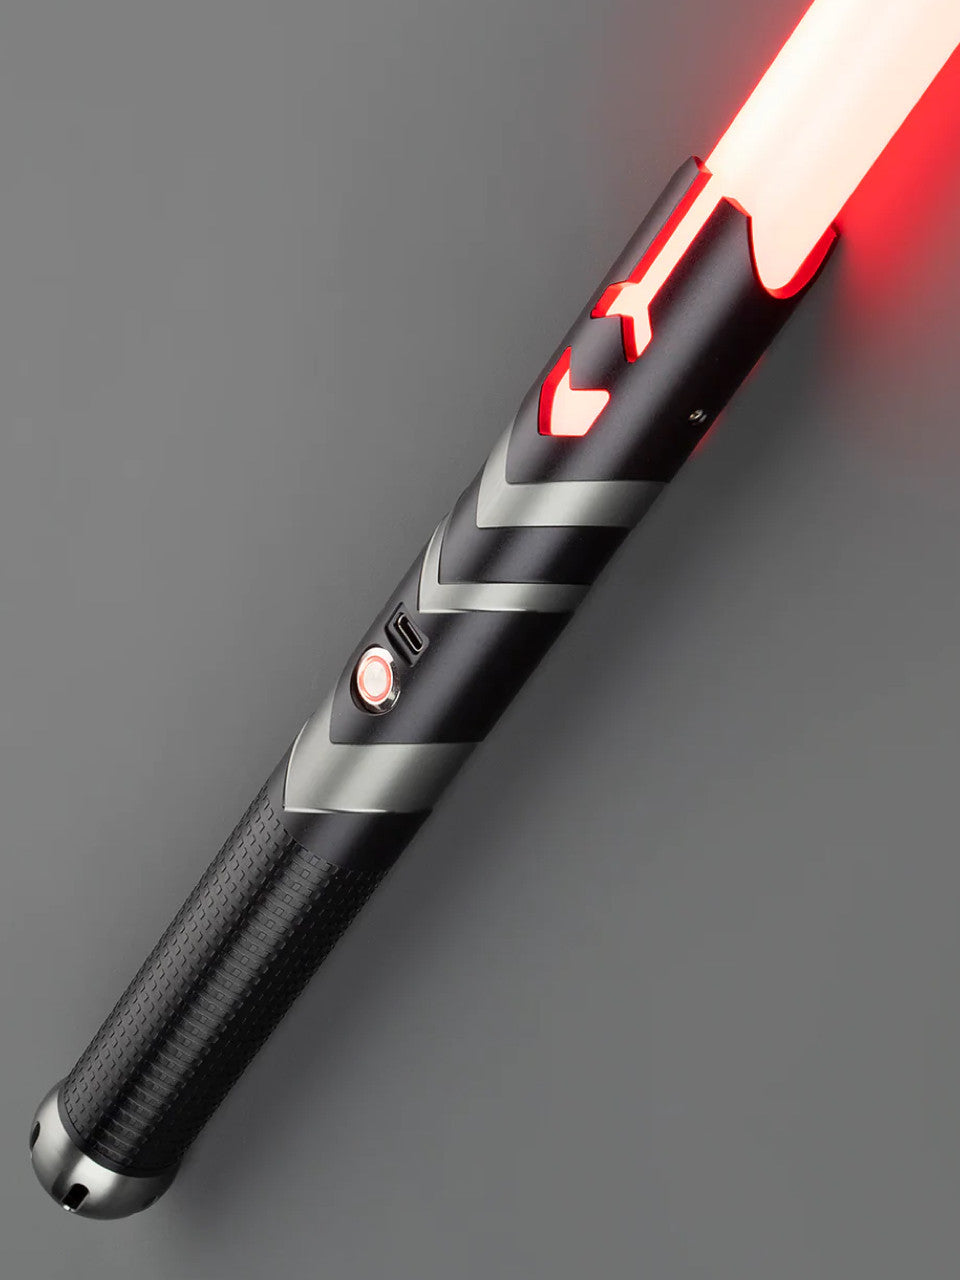 THE SITH LORD LIGHTSABER